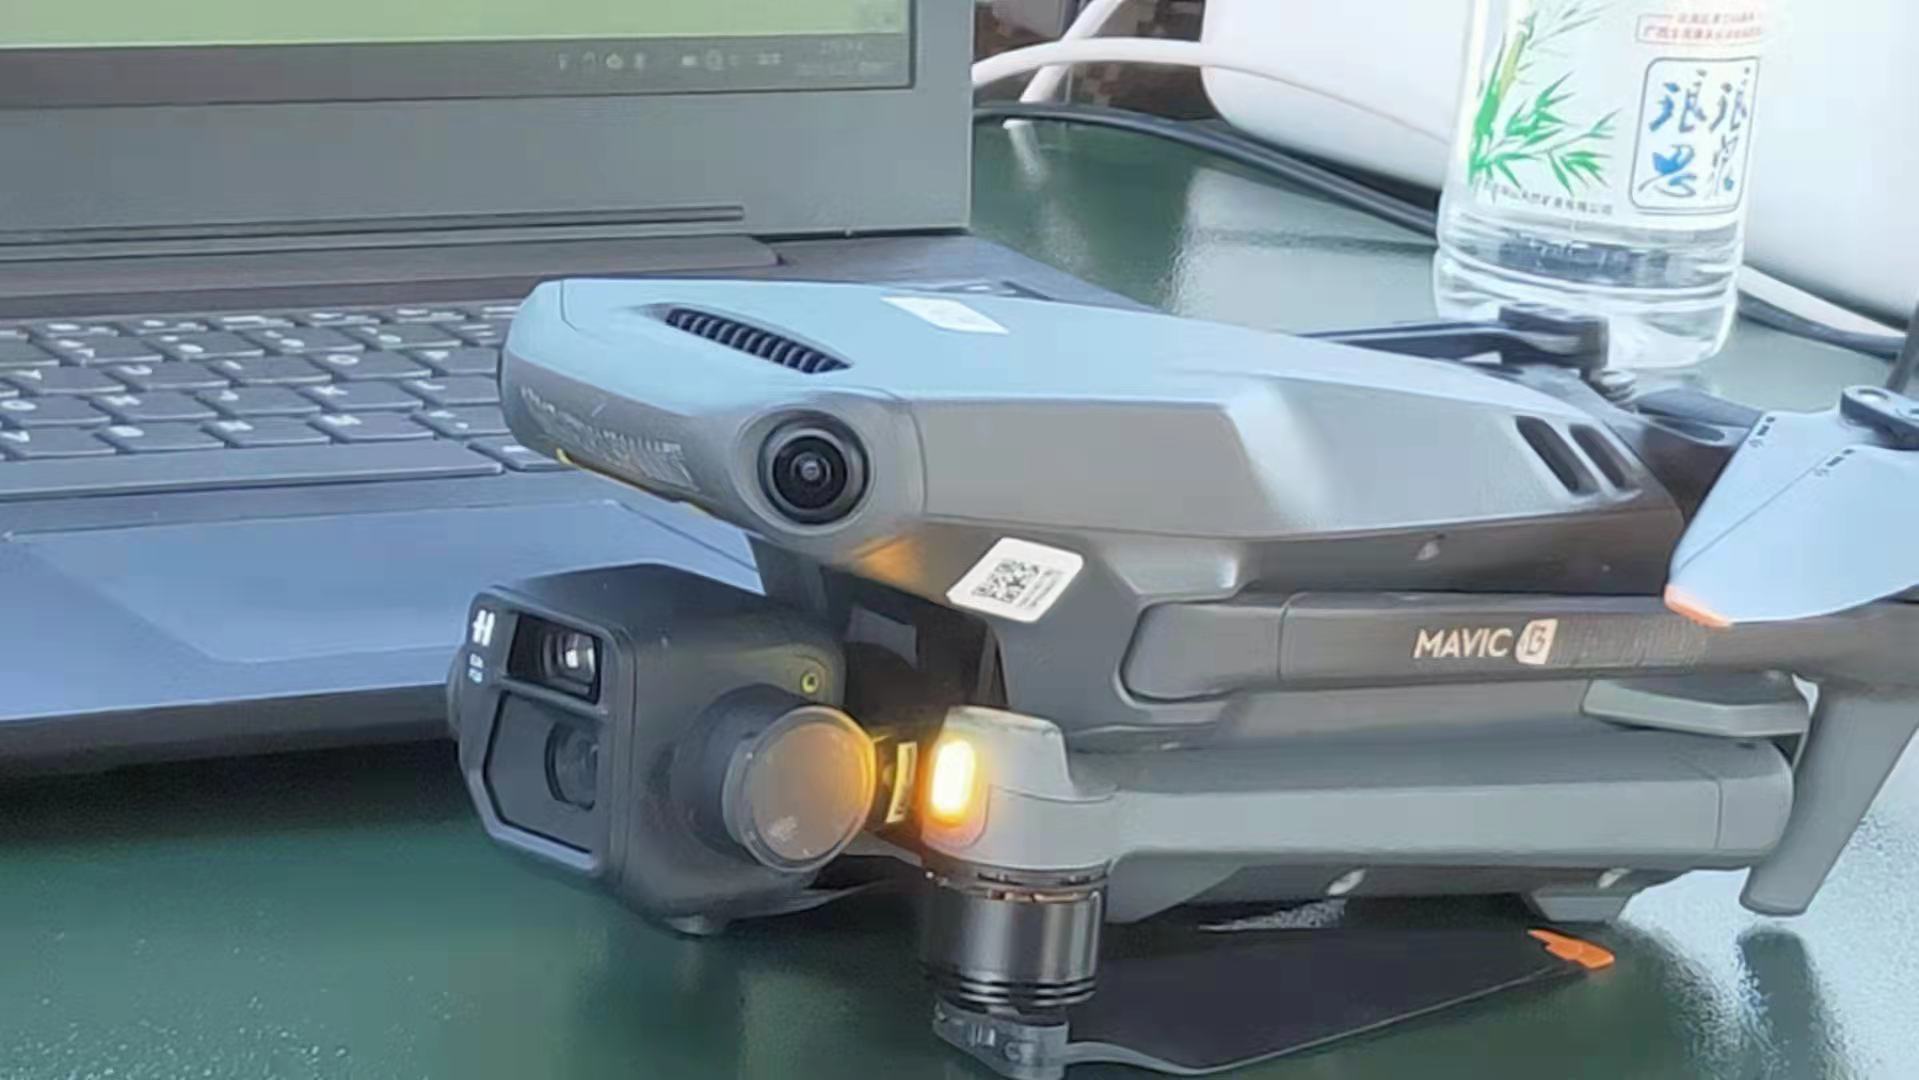 real life image of a mavic 3 infront of a laptop and a bottle